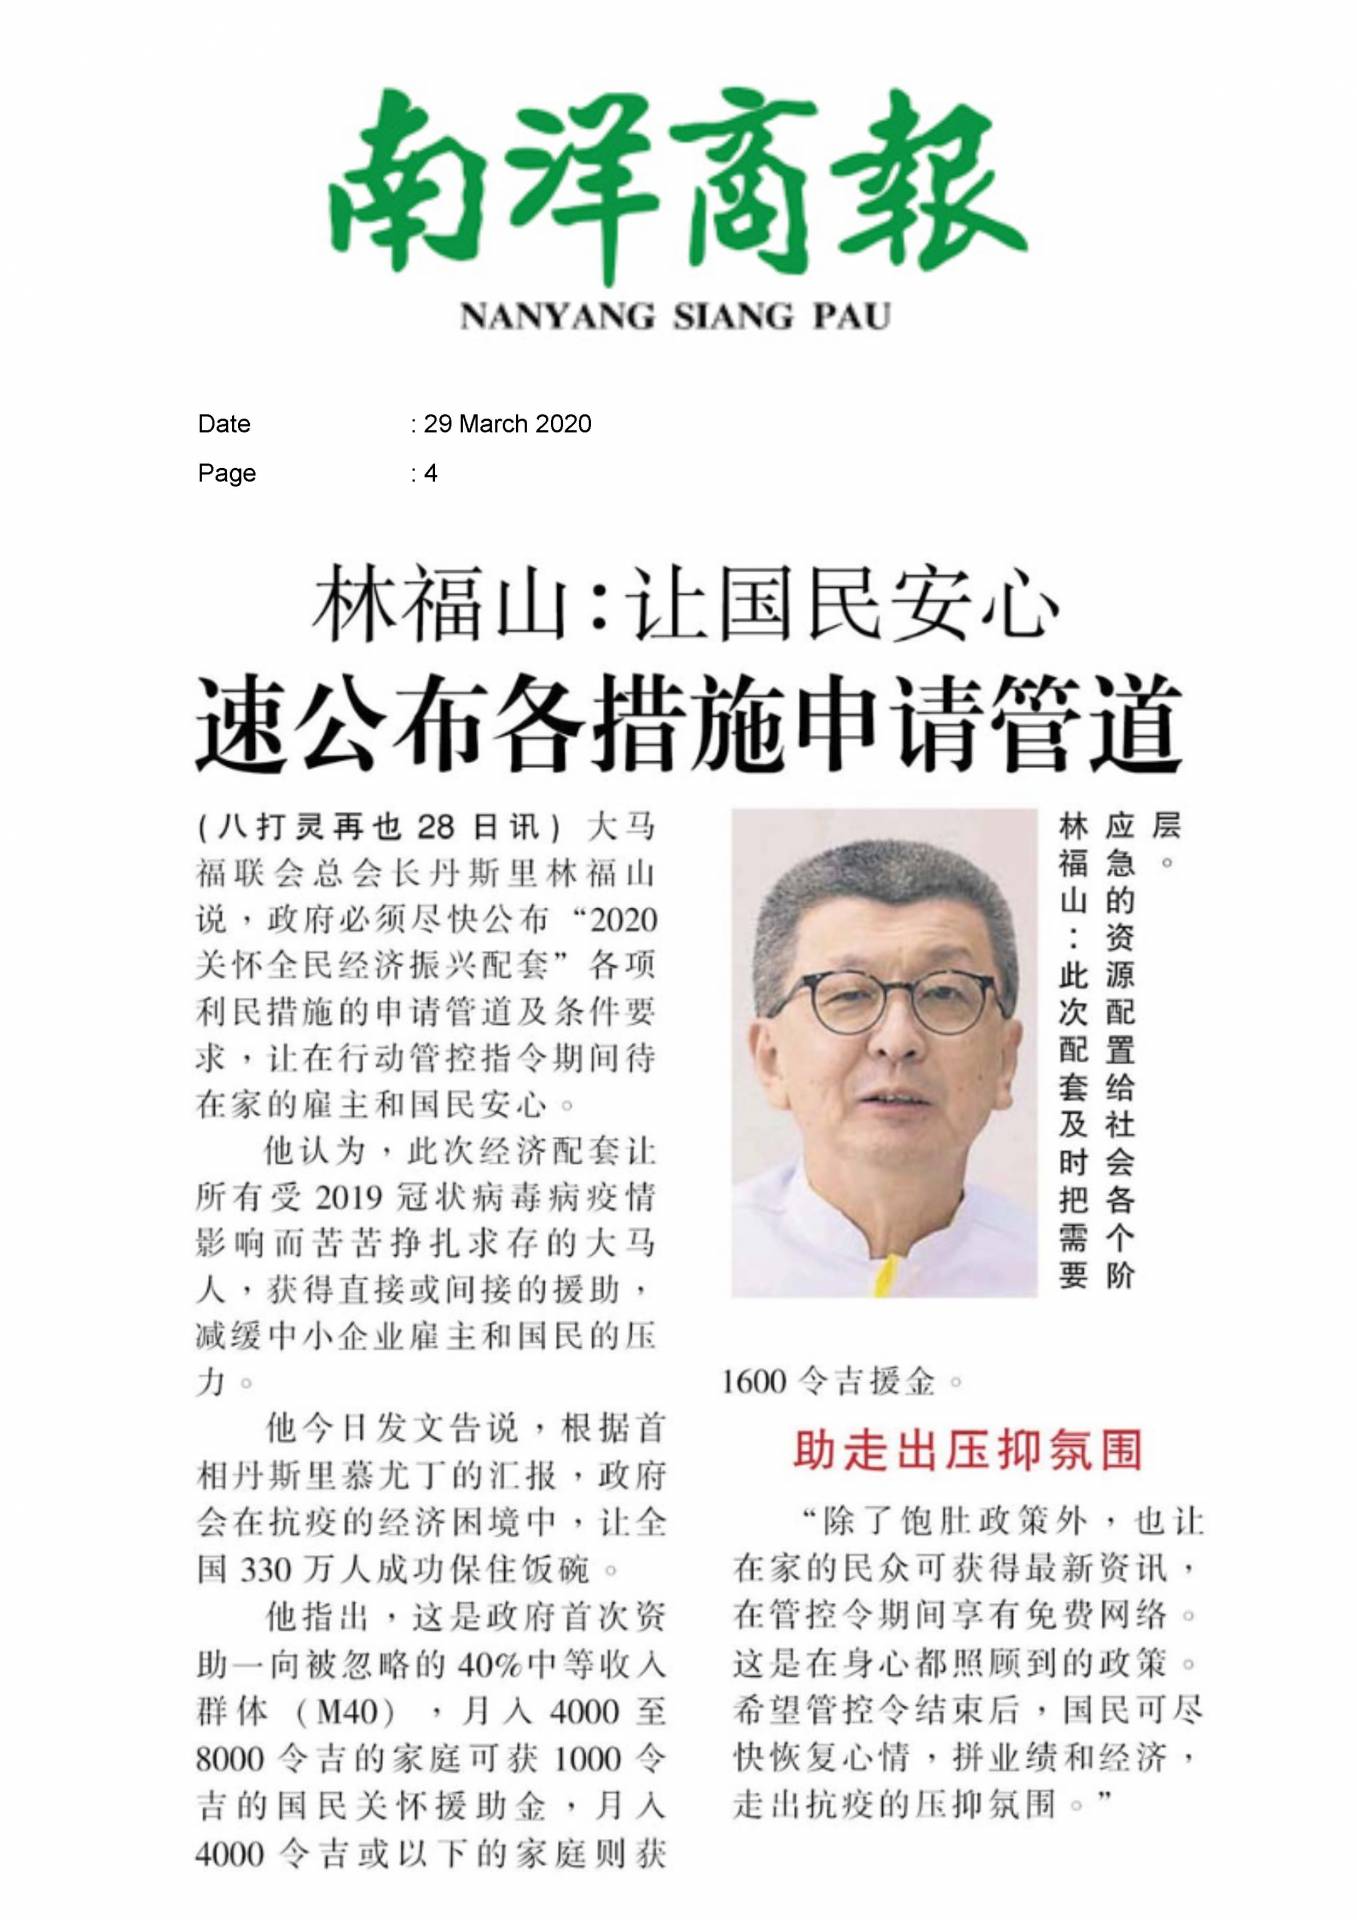 2020.03.29 Nanyang - Lim Hock San urges govt to announce application channels for measures quickly